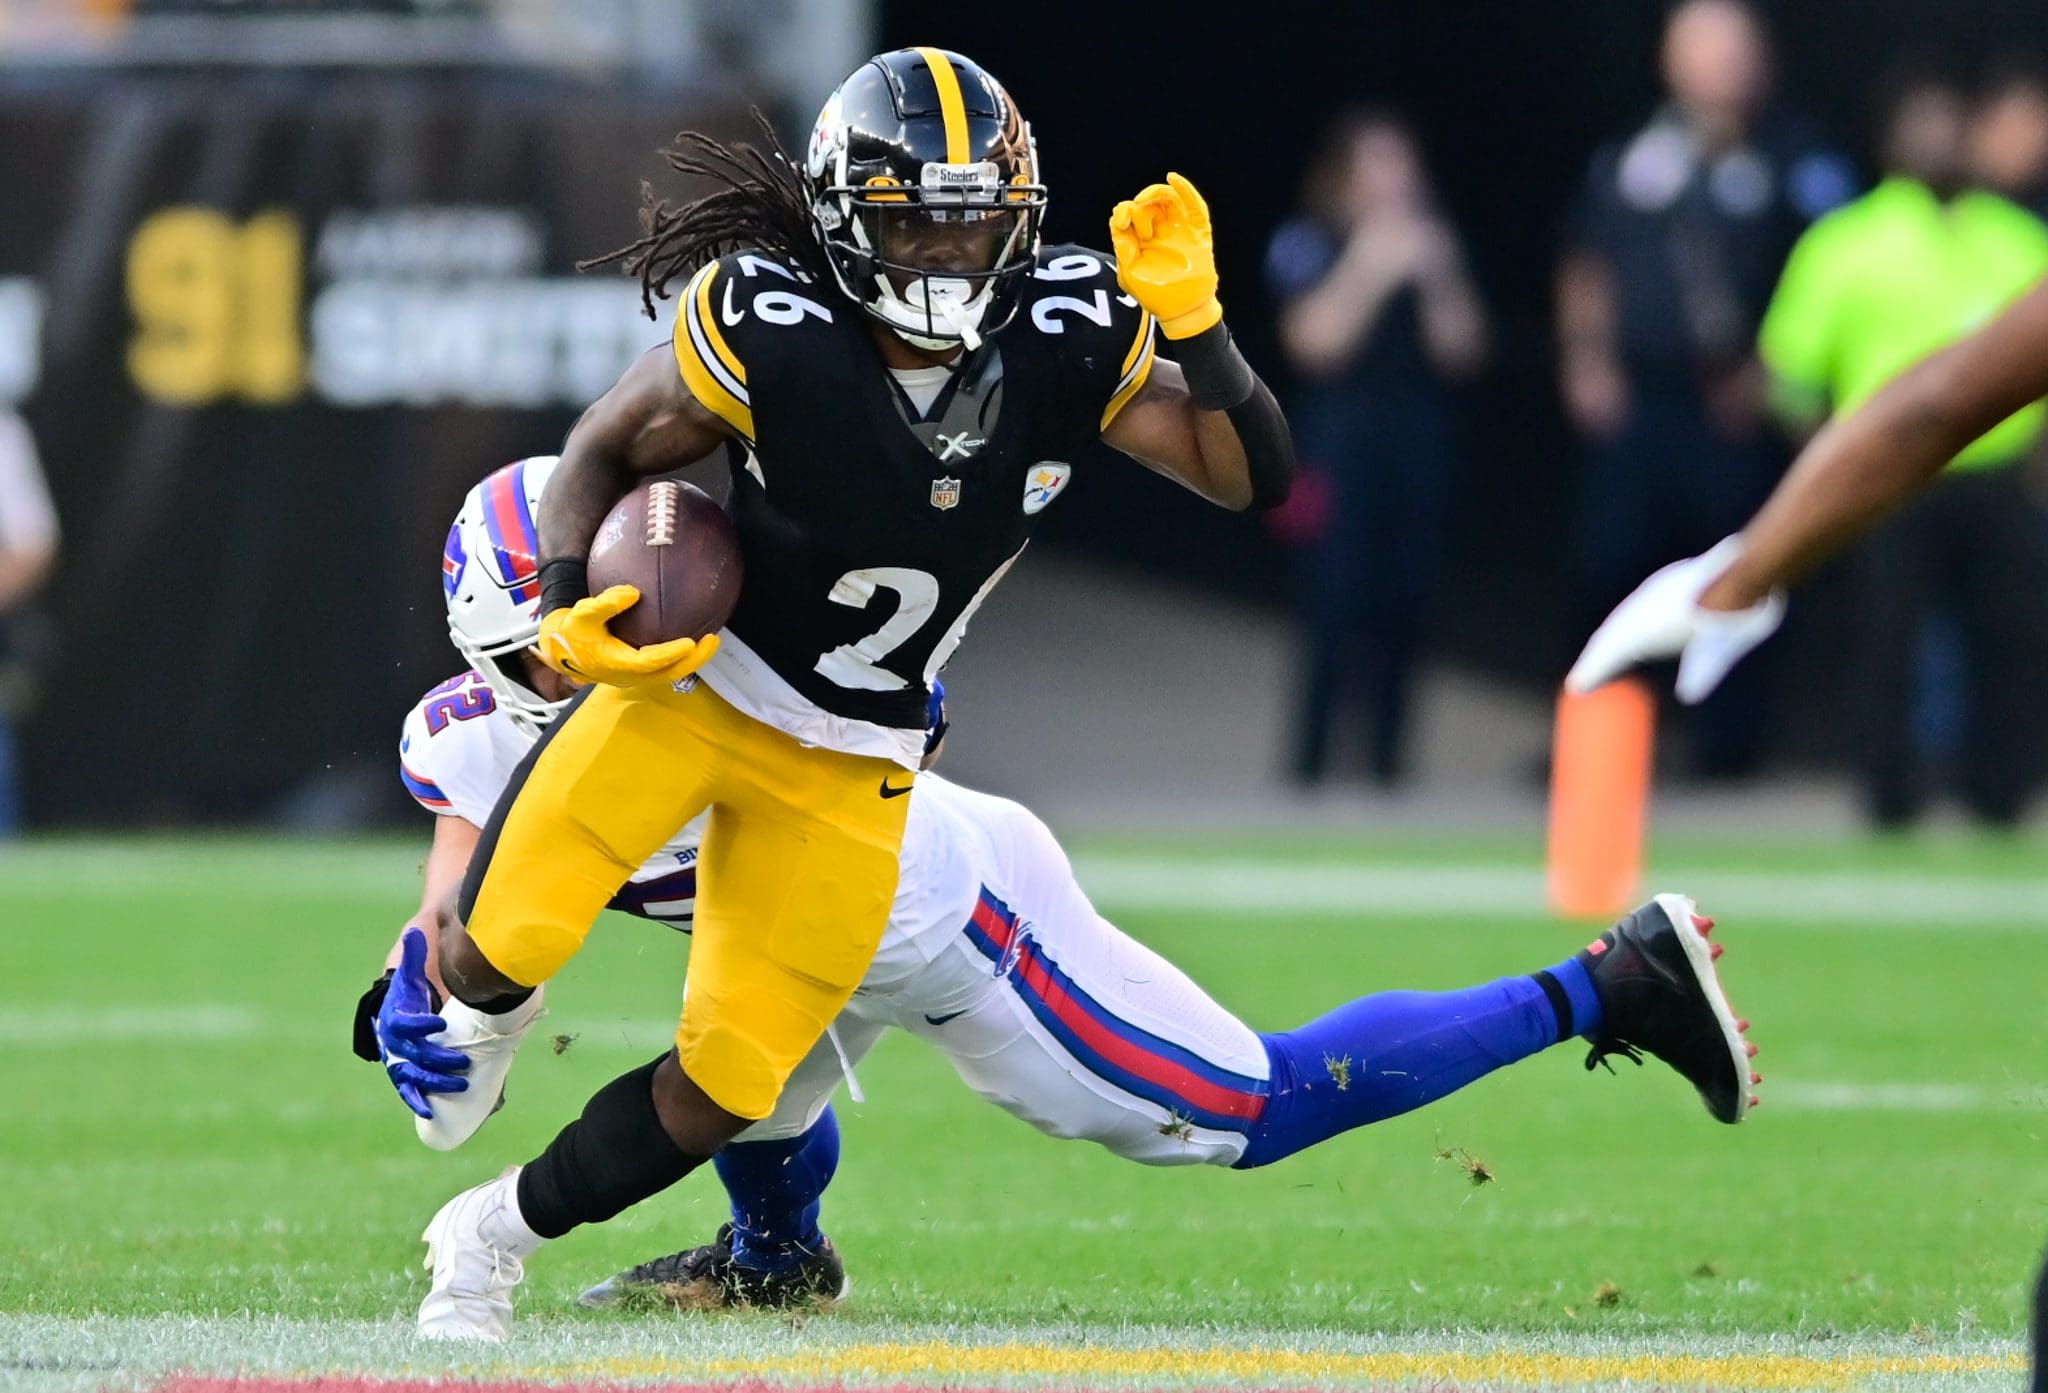 Limited tickets available for the Bills vs. Steelers 2021 season opener